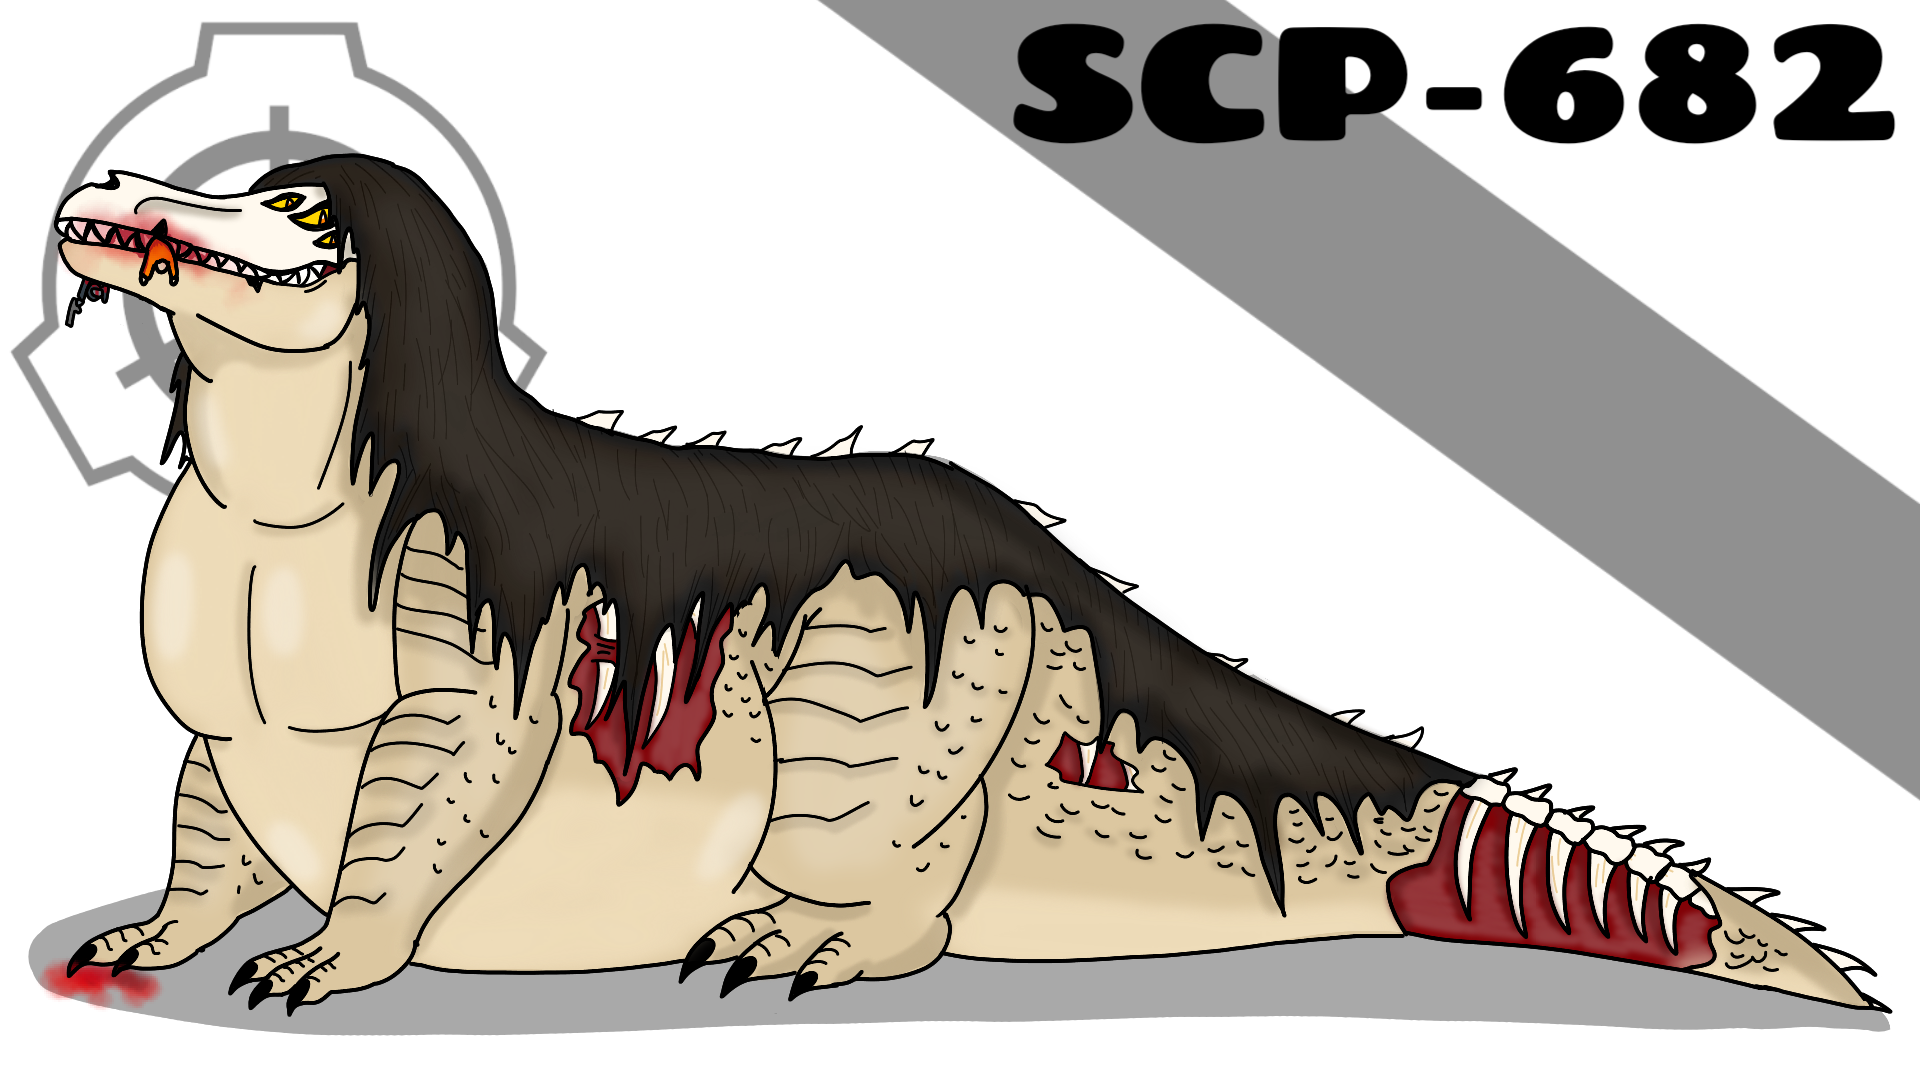 Fat Scp 682 Hard To Destroy Reptile By Missingno 54 On Deviantart.